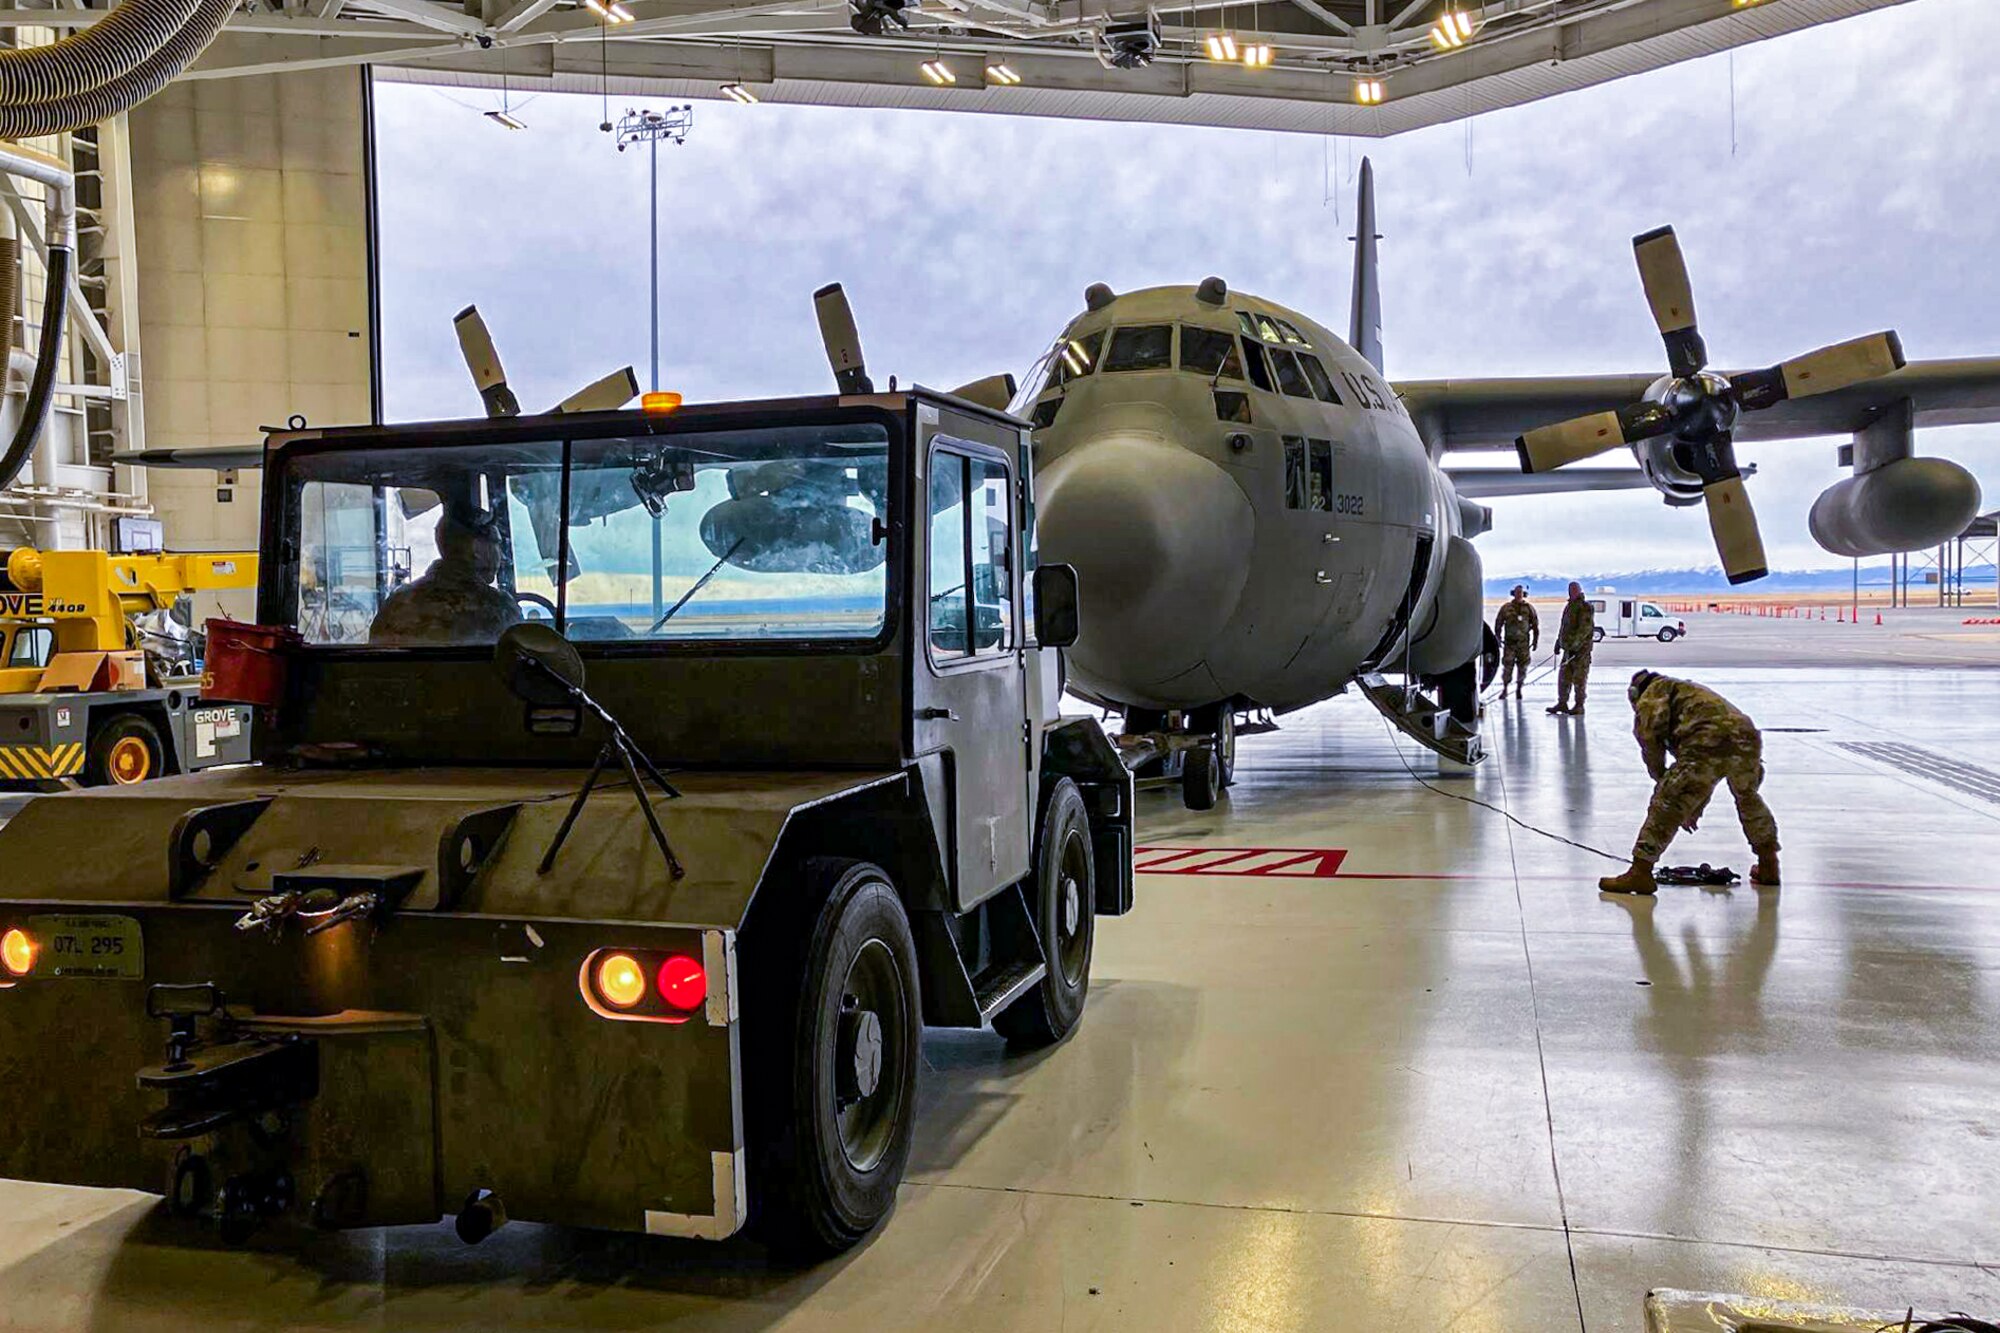 A maintenance recovery team from the 910th Airlift Wing tows a C-130H Hercules aircraft out of a hangar at Mountain Home Air Force Base, Idaho, Jan. 11, 2022.